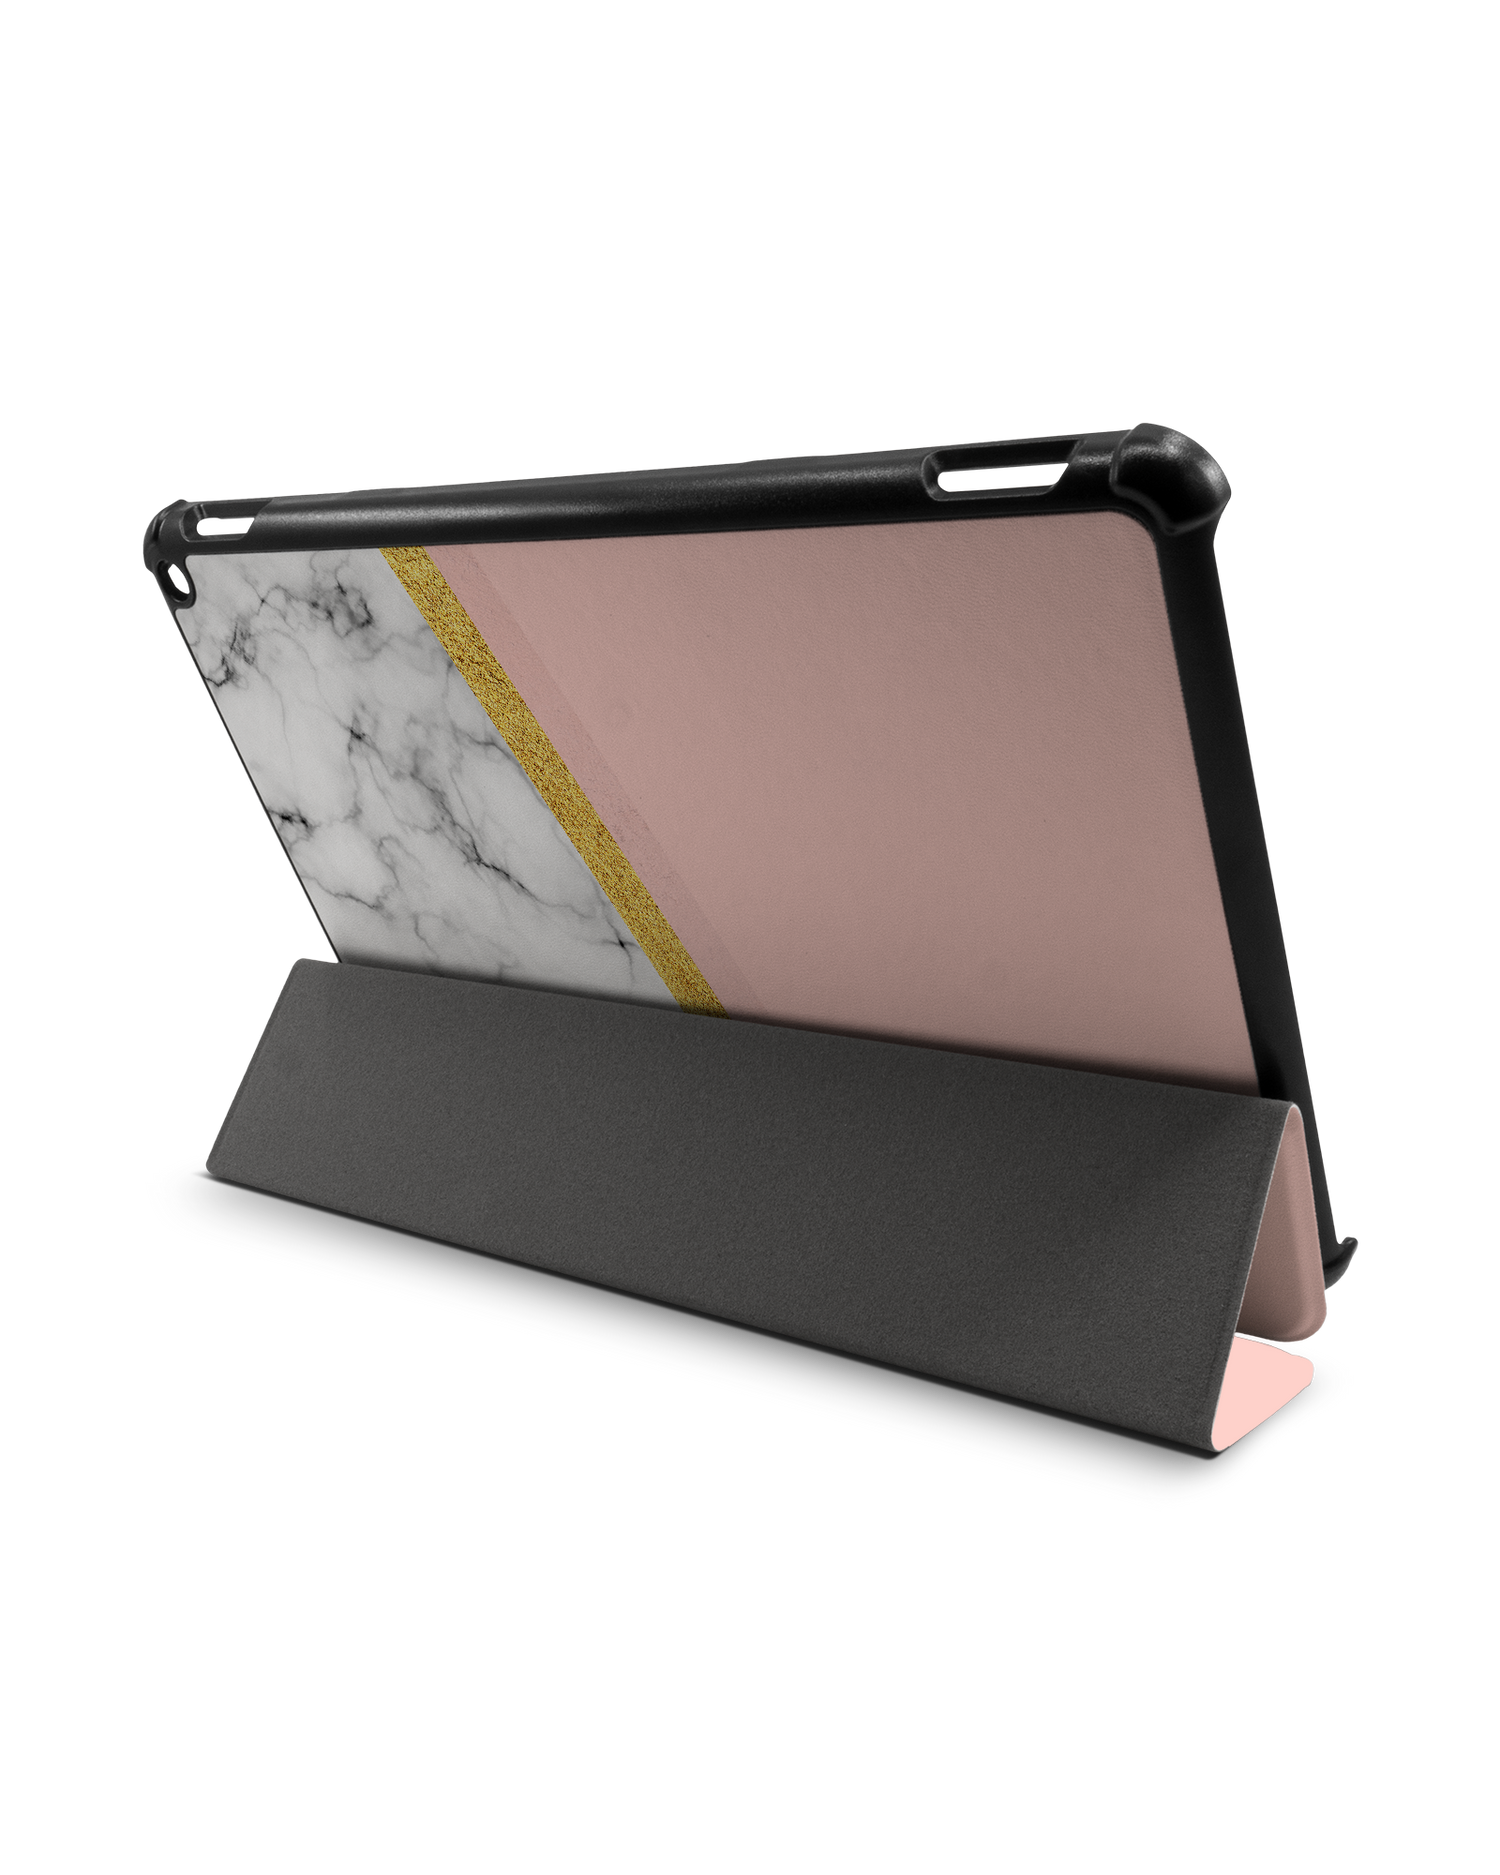 Marble Slice Tablet Smart Case for Amazon Fire HD 10 (2021): Used as Stand